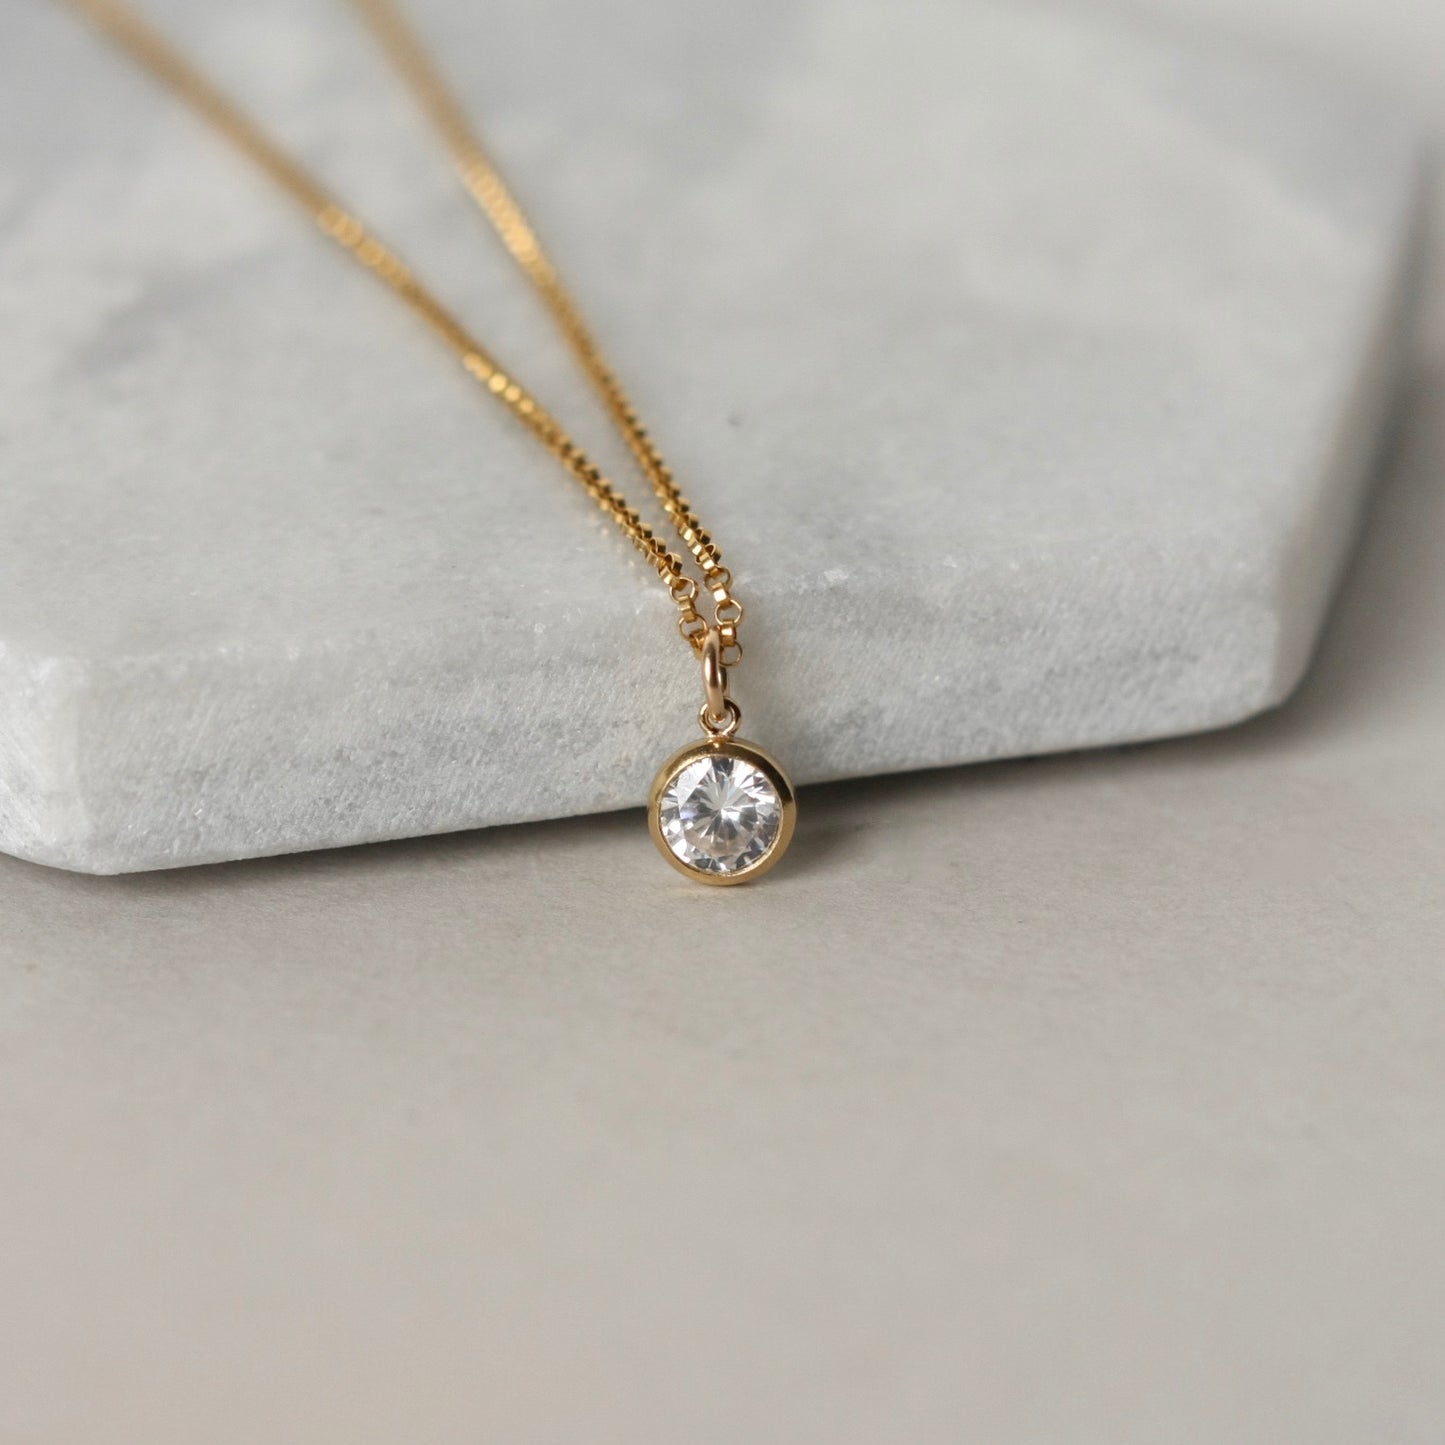 Gold CZ Sparkly Solitaire Charm Necklace